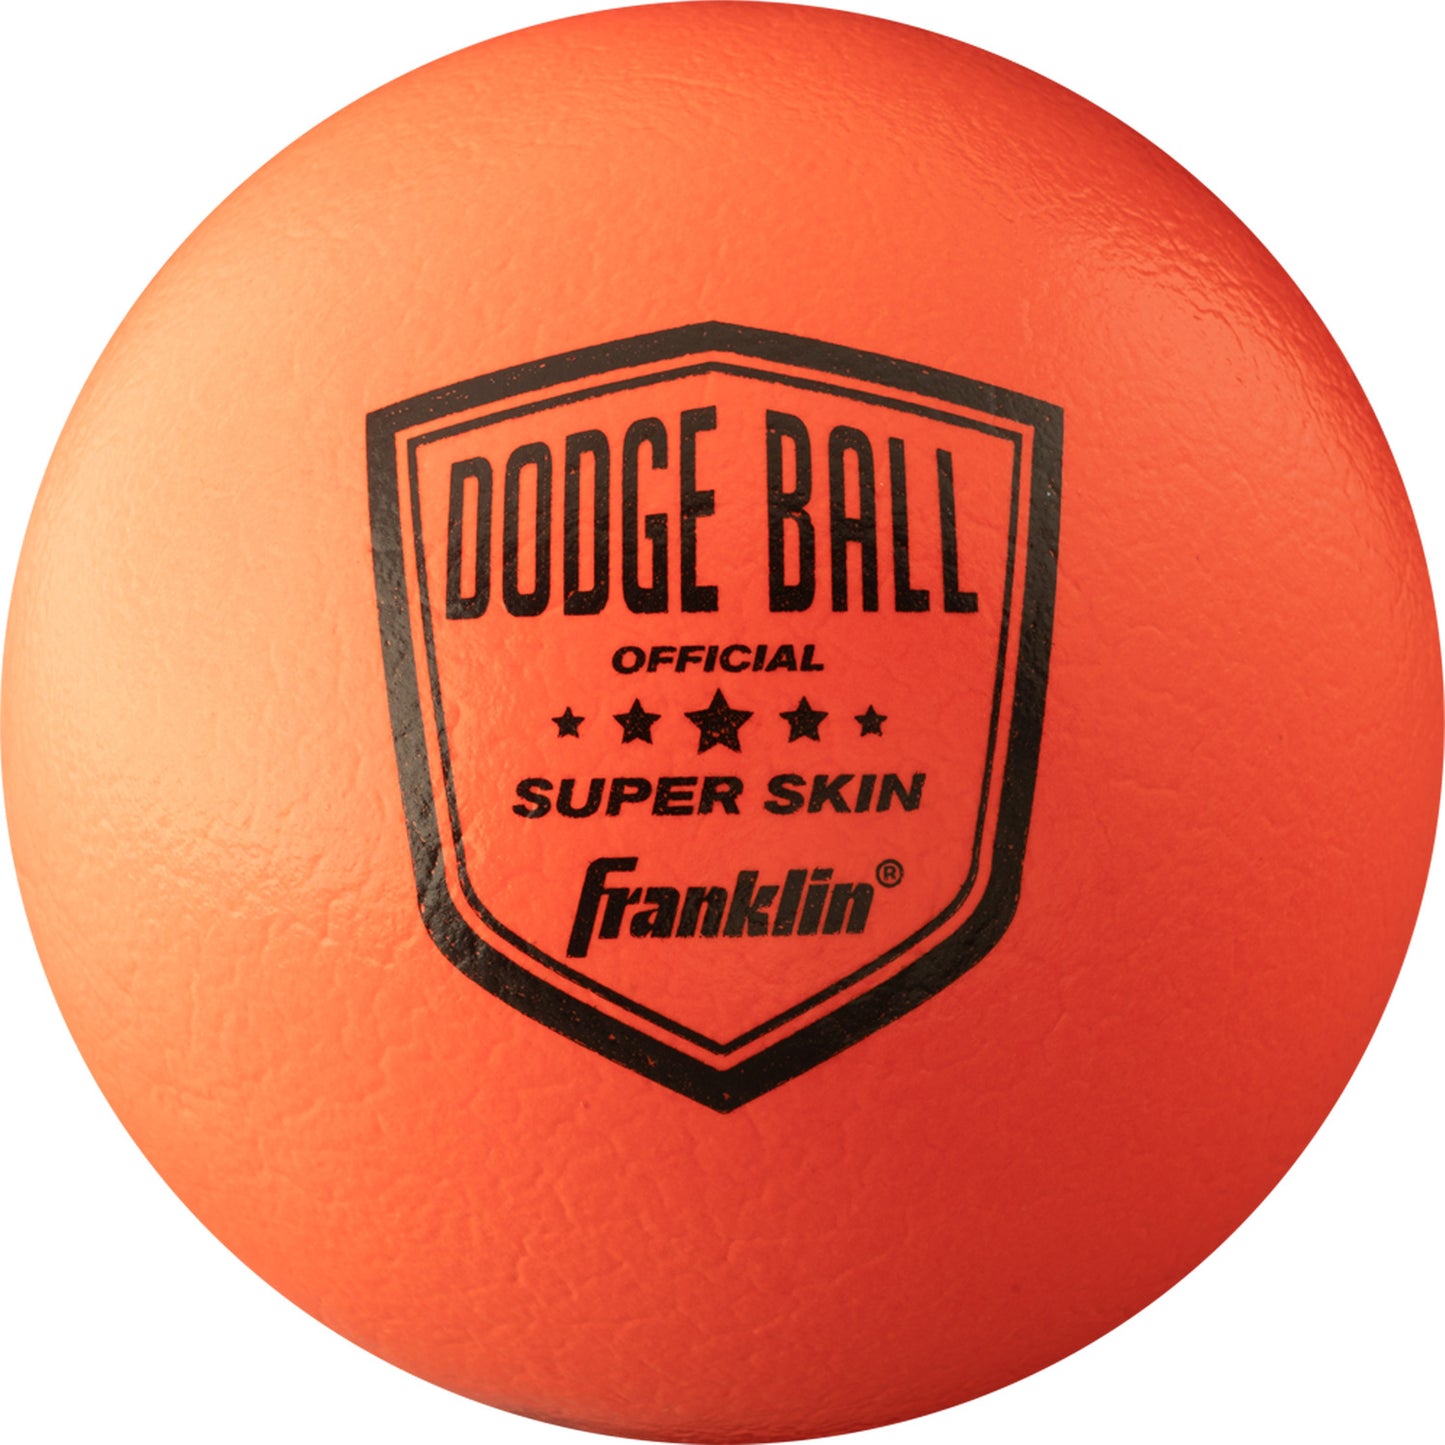 6 Superskin Dodge Ball (Assorted Colors)